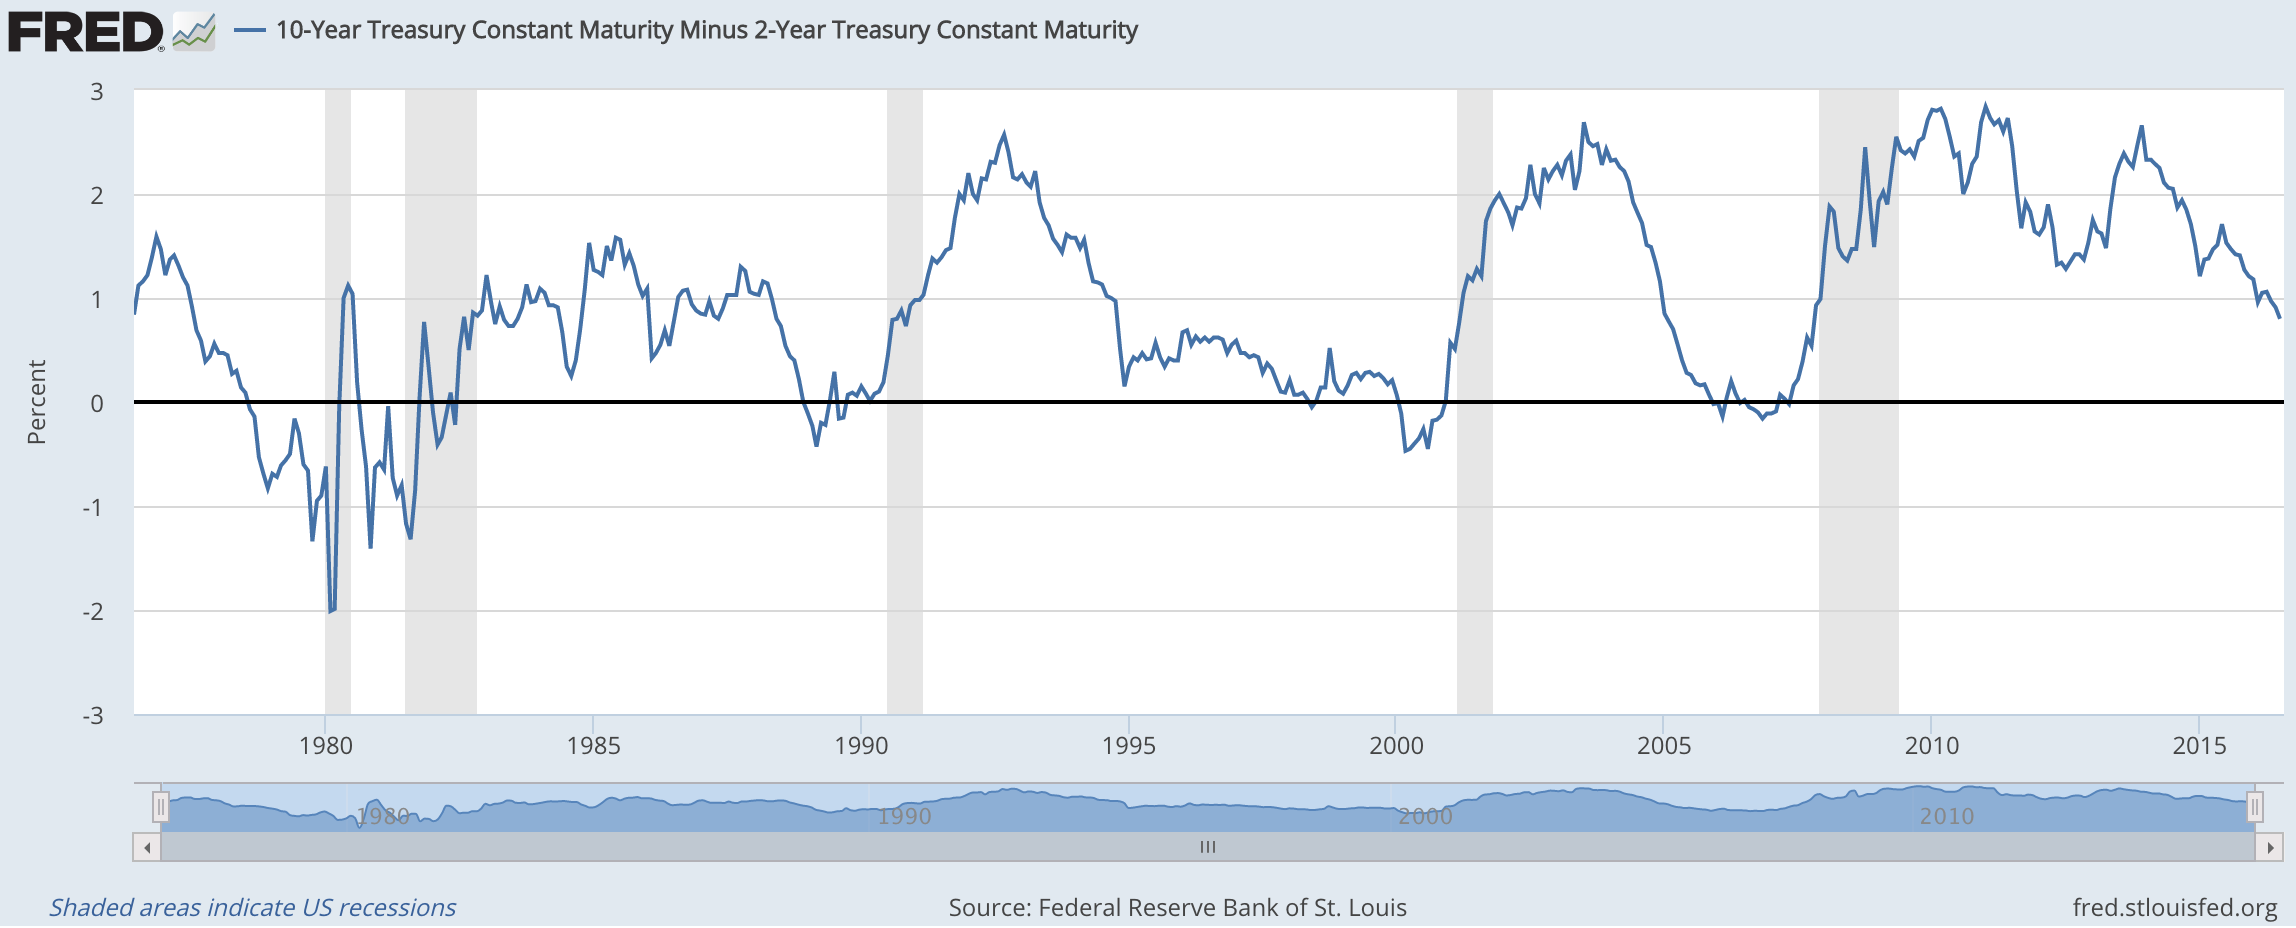 Are We At Risk of an Inverted Yield Curve? - A Wealth of ...